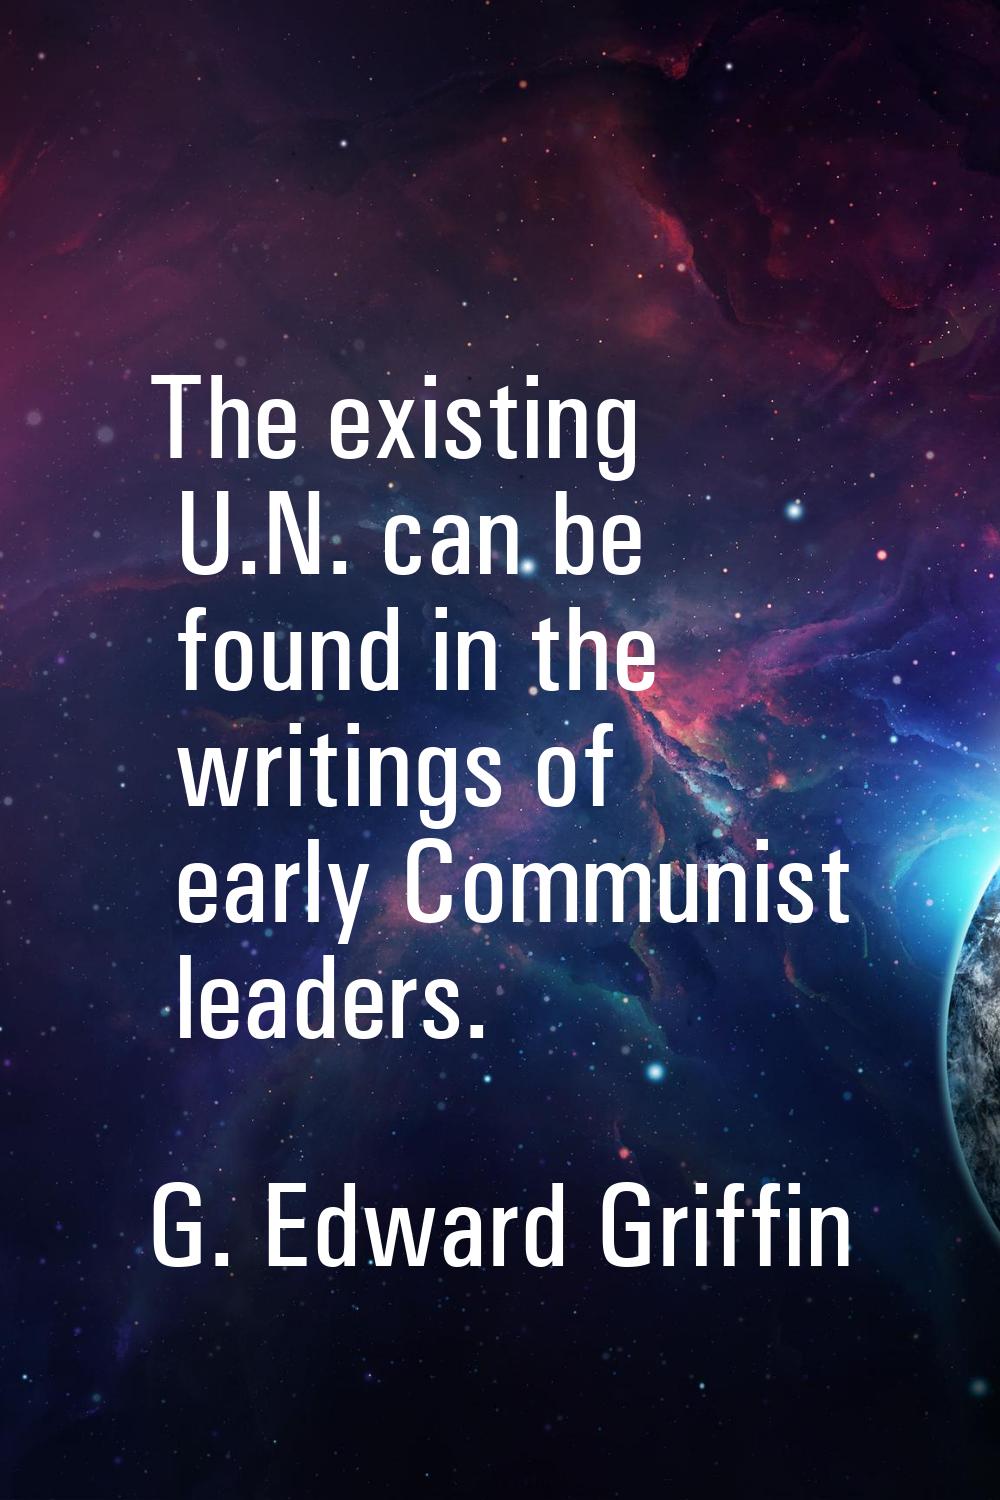 The existing U.N. can be found in the writings of early Communist leaders.